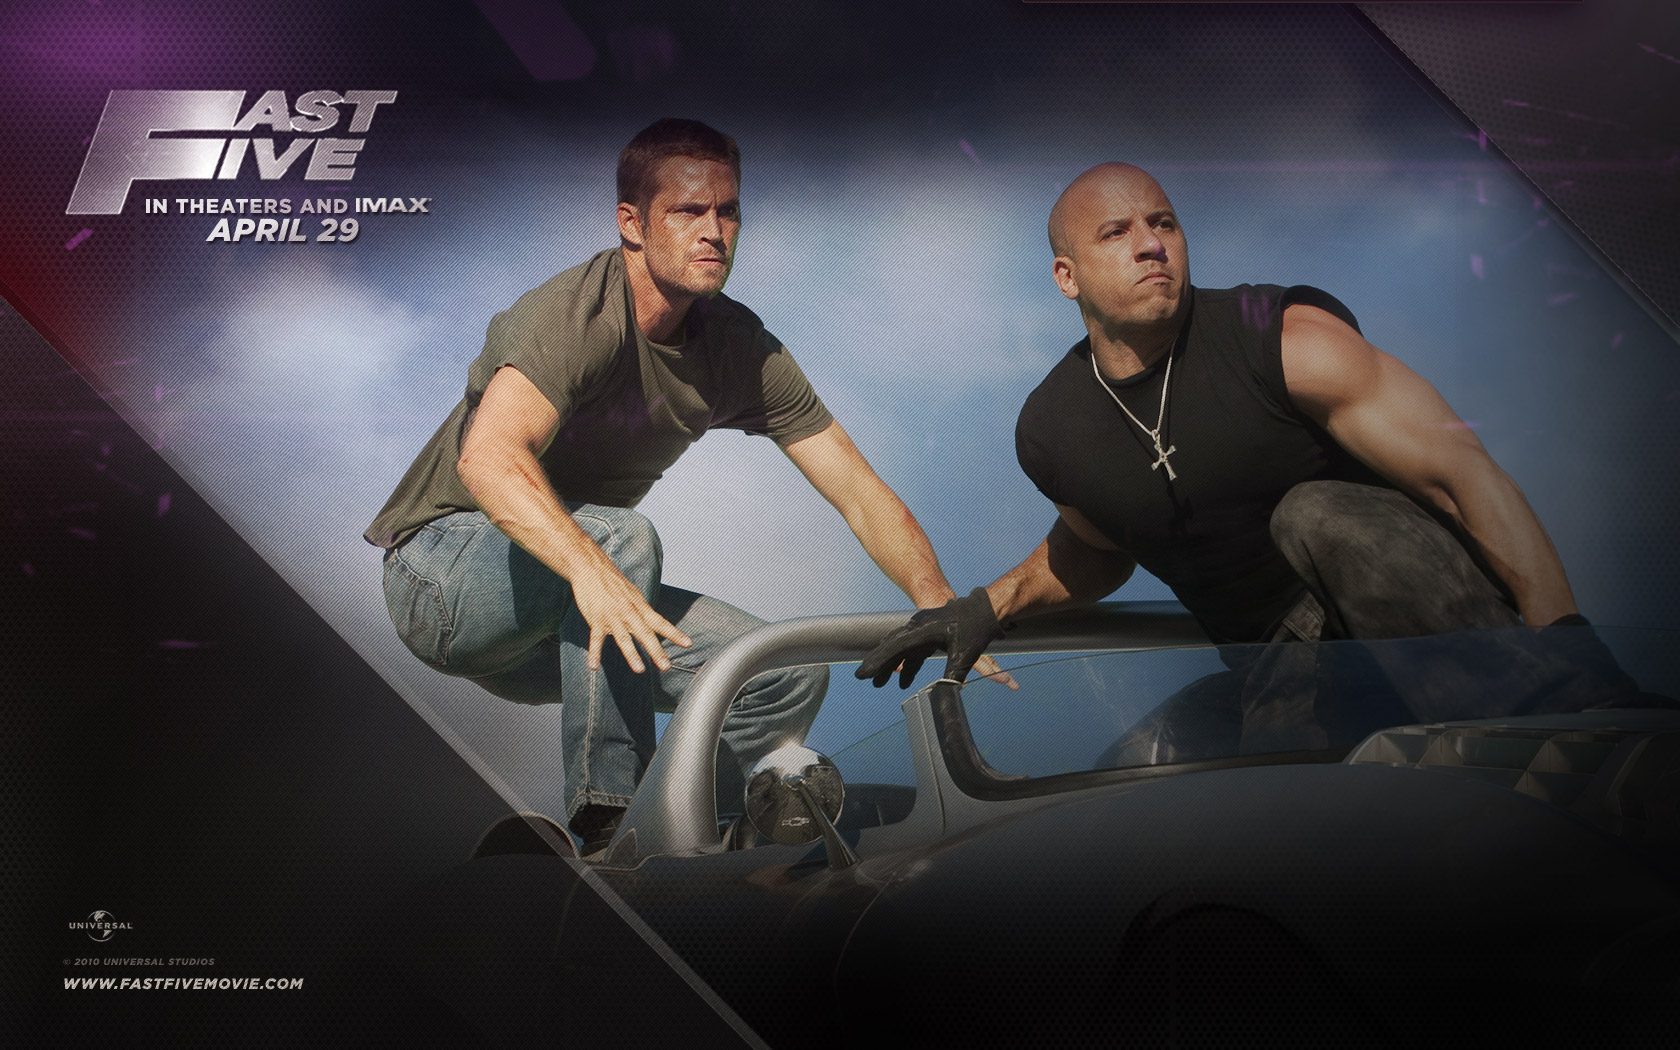 Fast Five Wallpapers 1680x1050   Movie Wallpapers 1680x1050